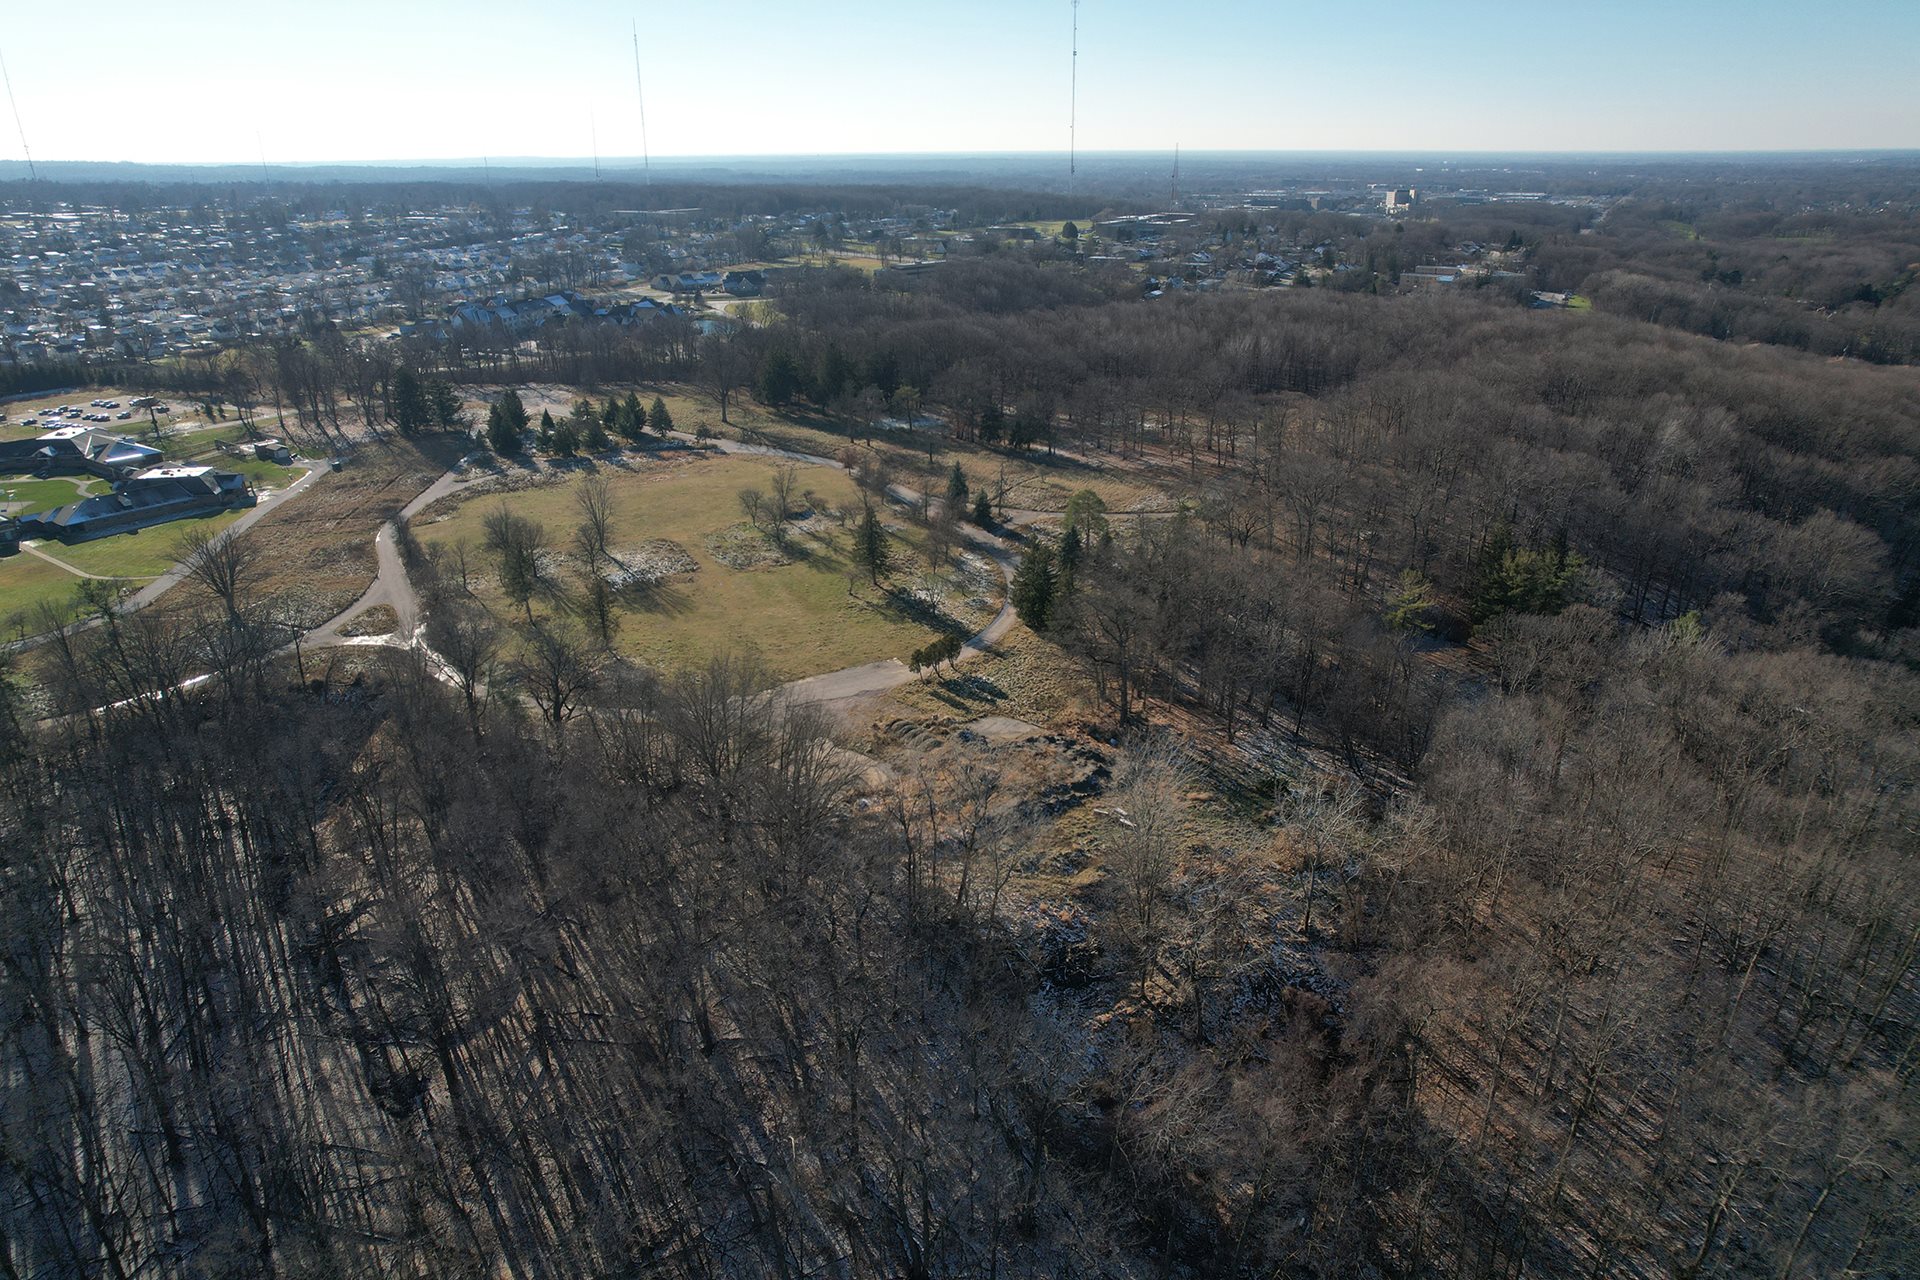 Cleveland Metroparks Grows to Over 25,000 Acres Across 49 Communities